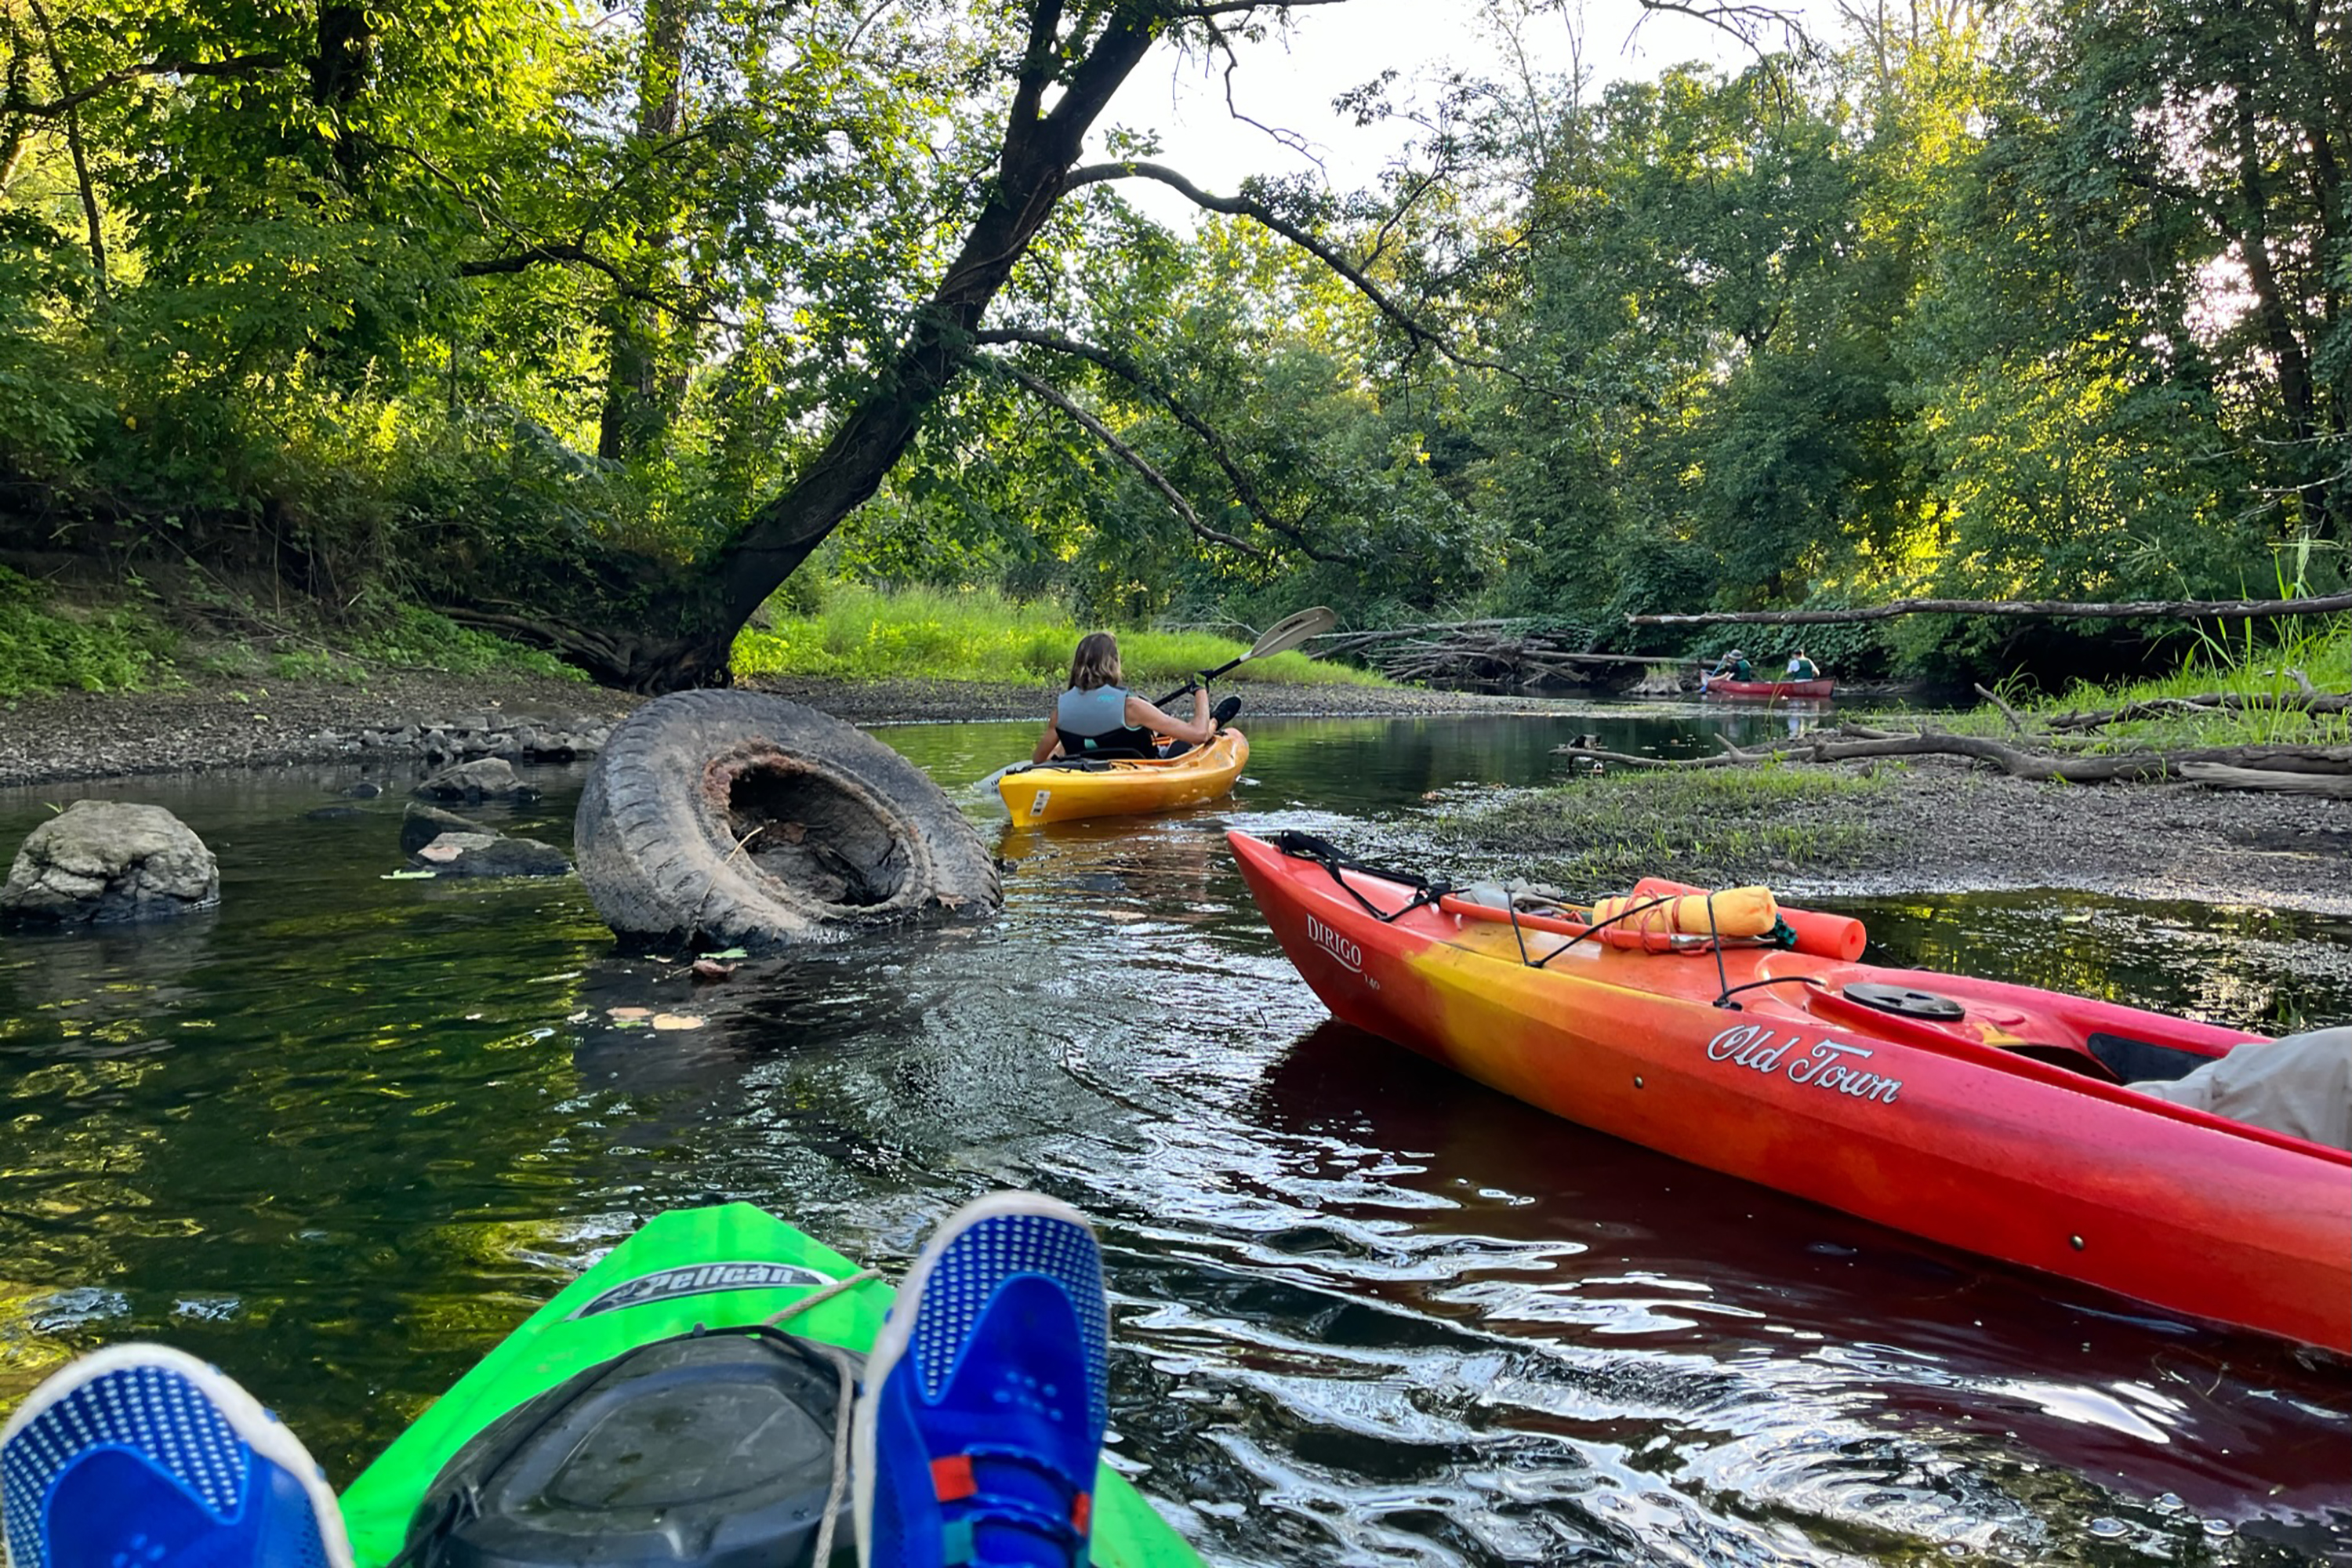 Paddlers glide by an old tire stuck in the river